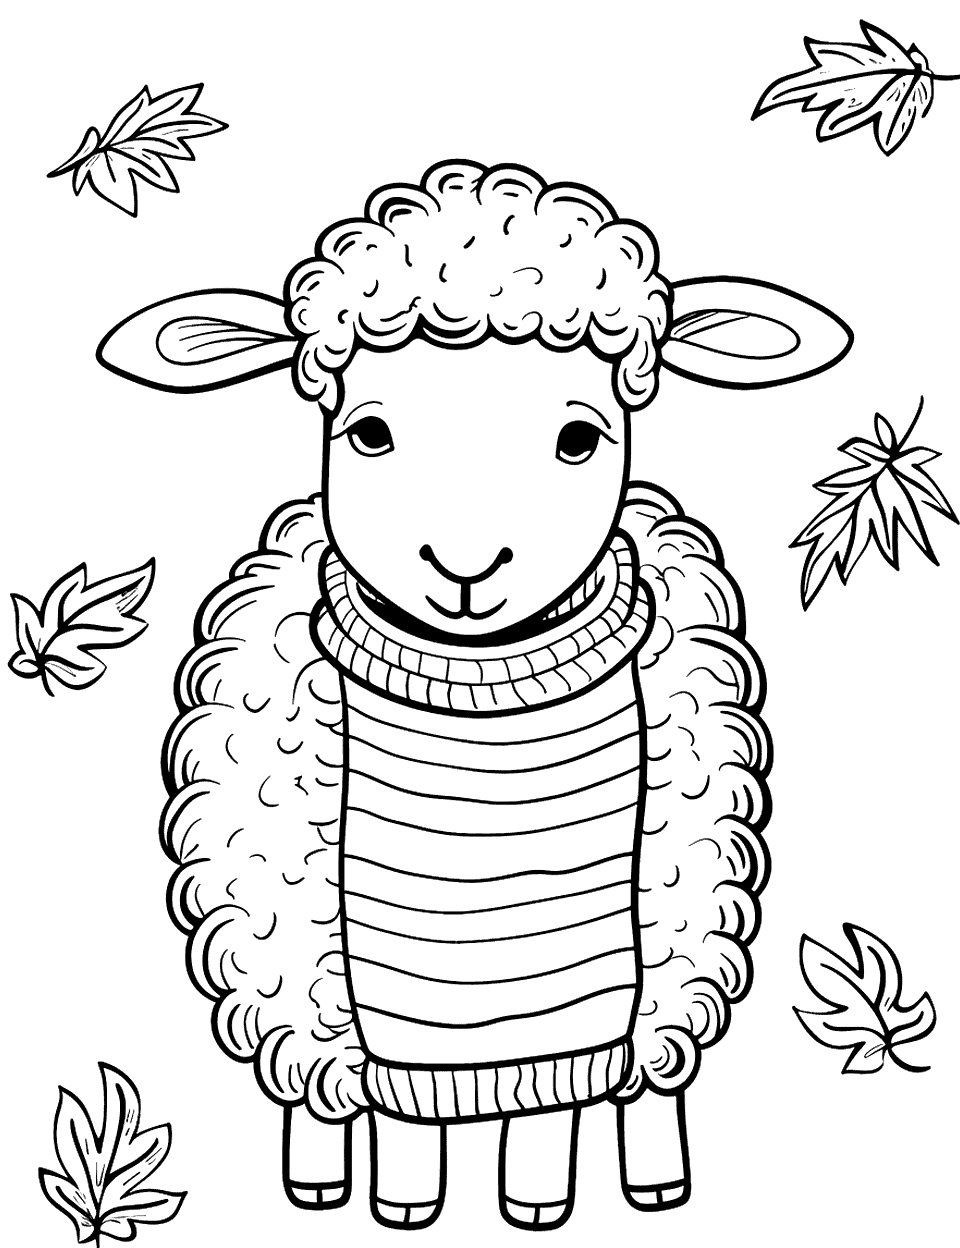 Sheep in a Sweater Coloring Page - A cute sheep wearing a cozy, knitted sweater as autumn leaves fall around it.